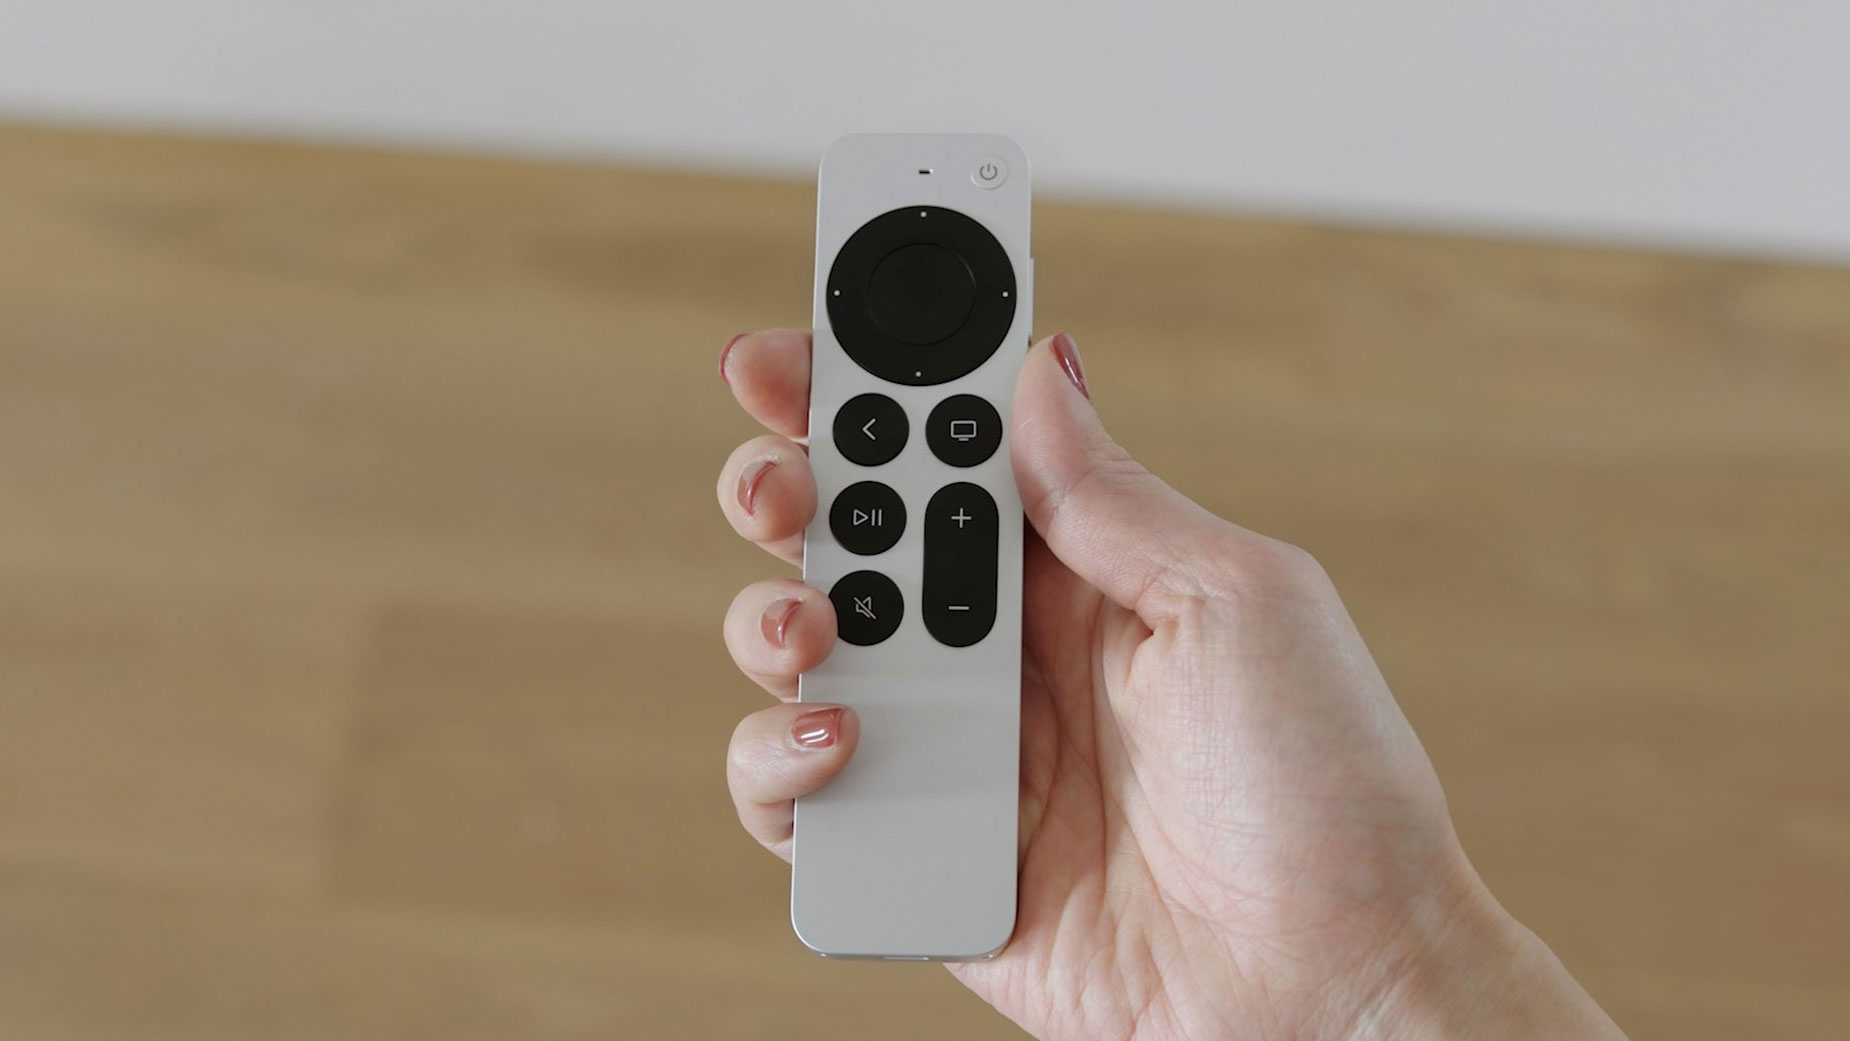 forbedre Cater Skibform The new Apple TV 4K comes with a new Siri Remote | TechCrunch